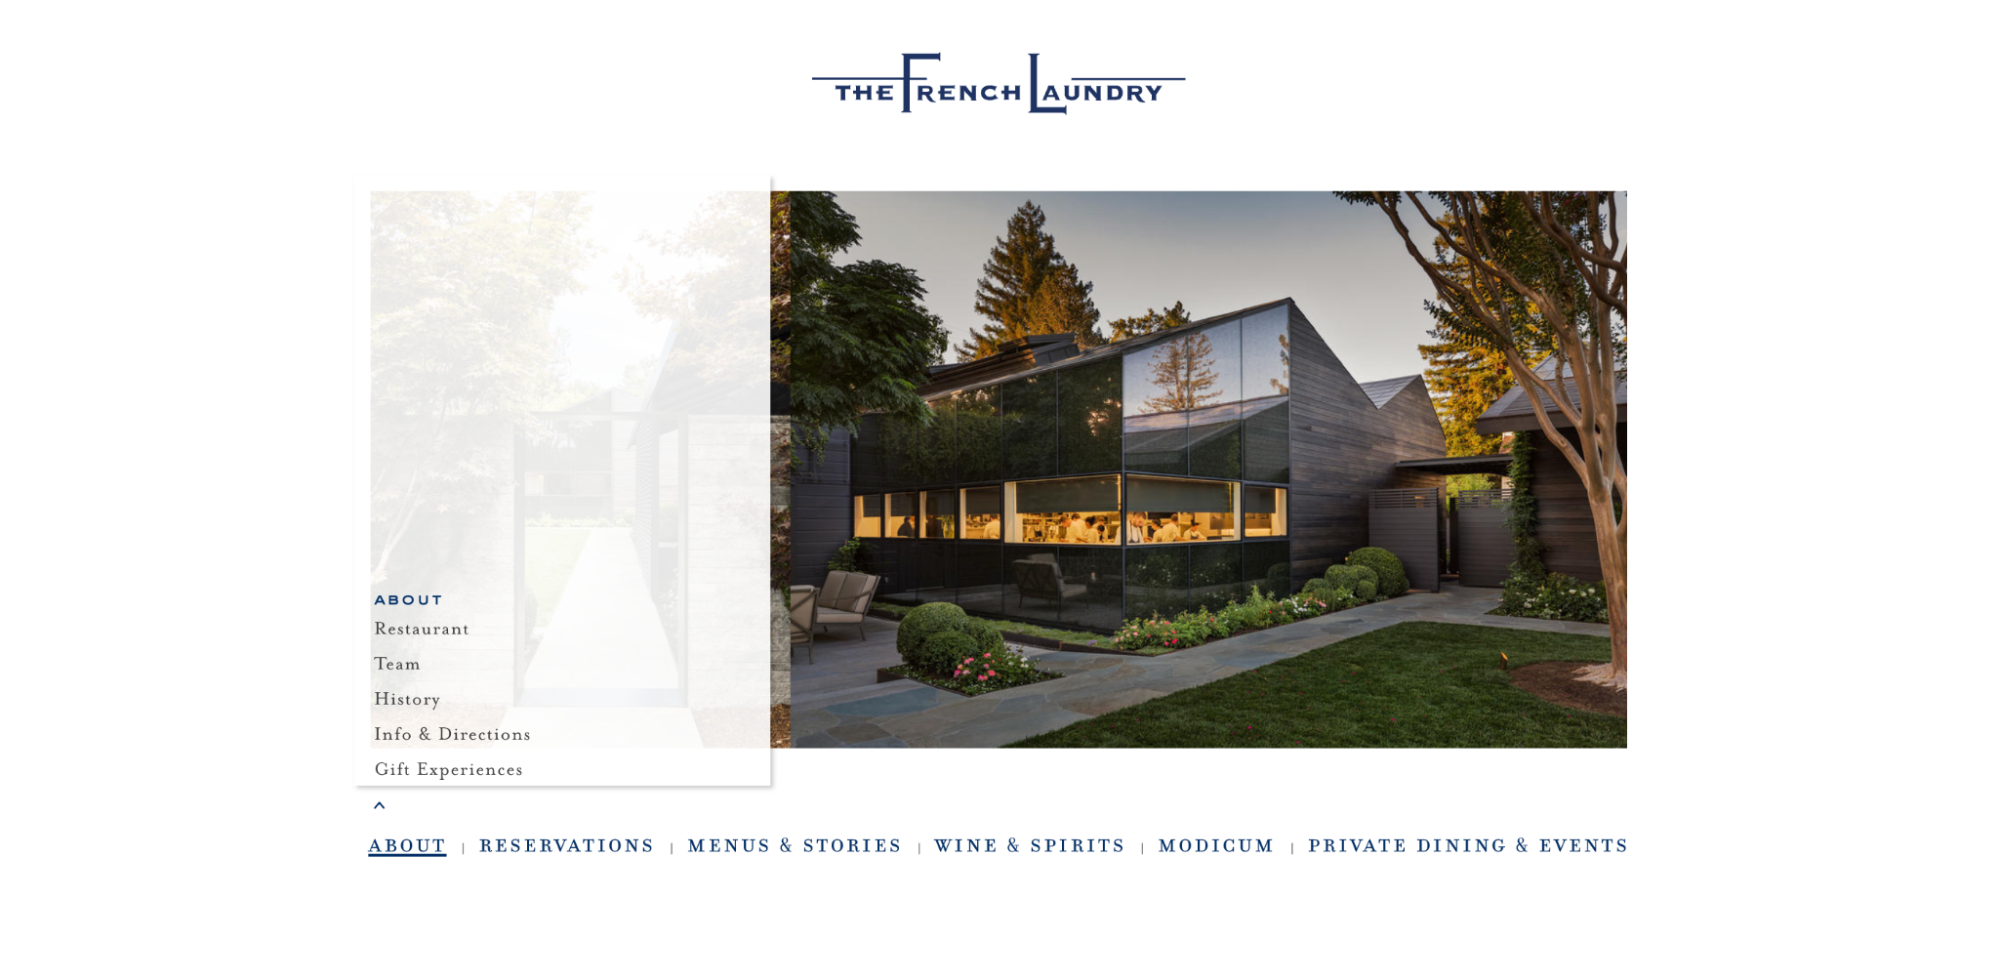 The French Laundry main page image